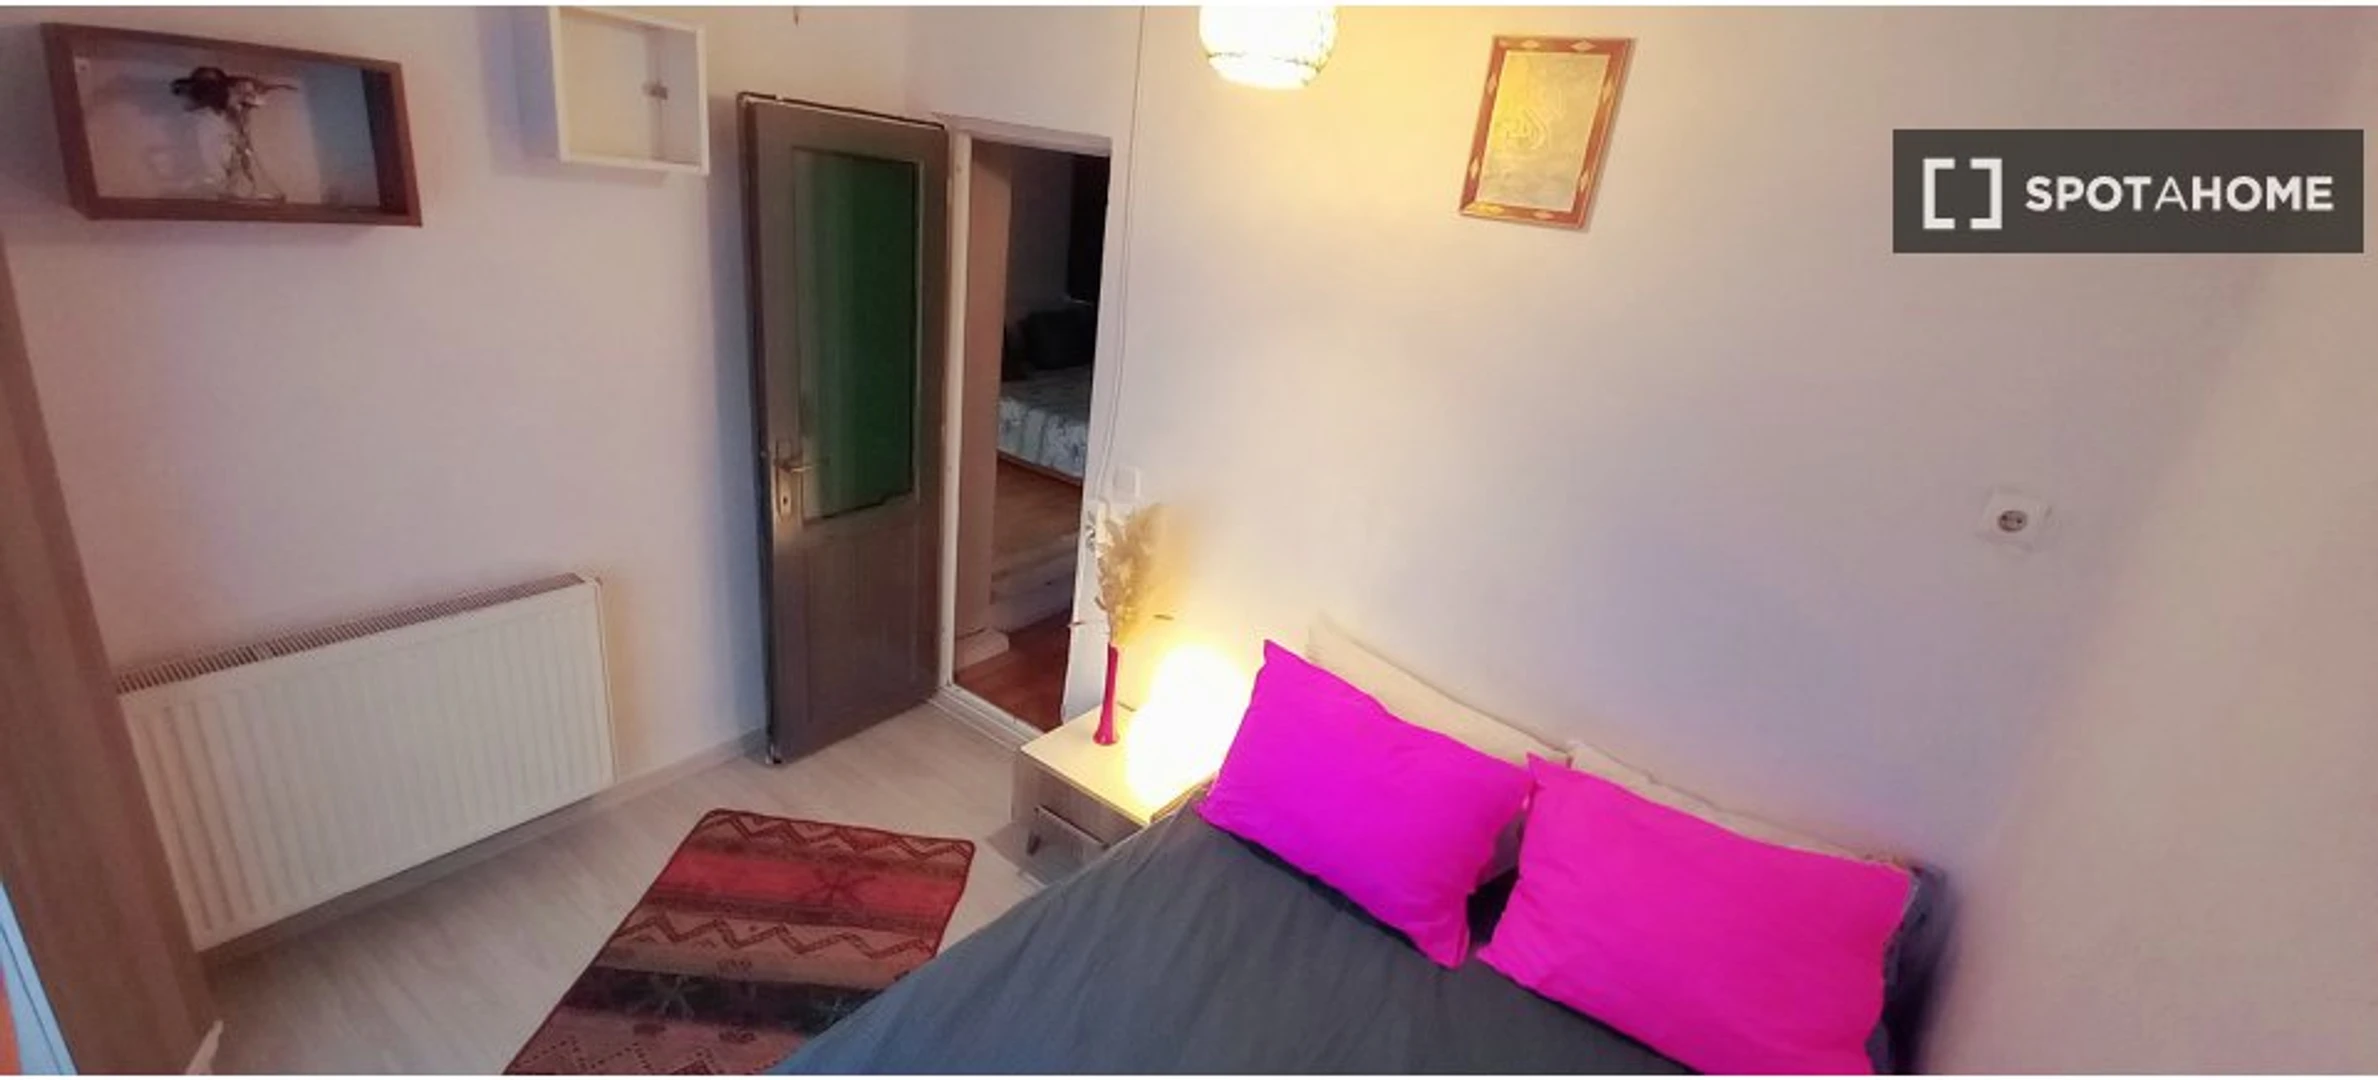 Room for rent in a shared flat in Istanbul